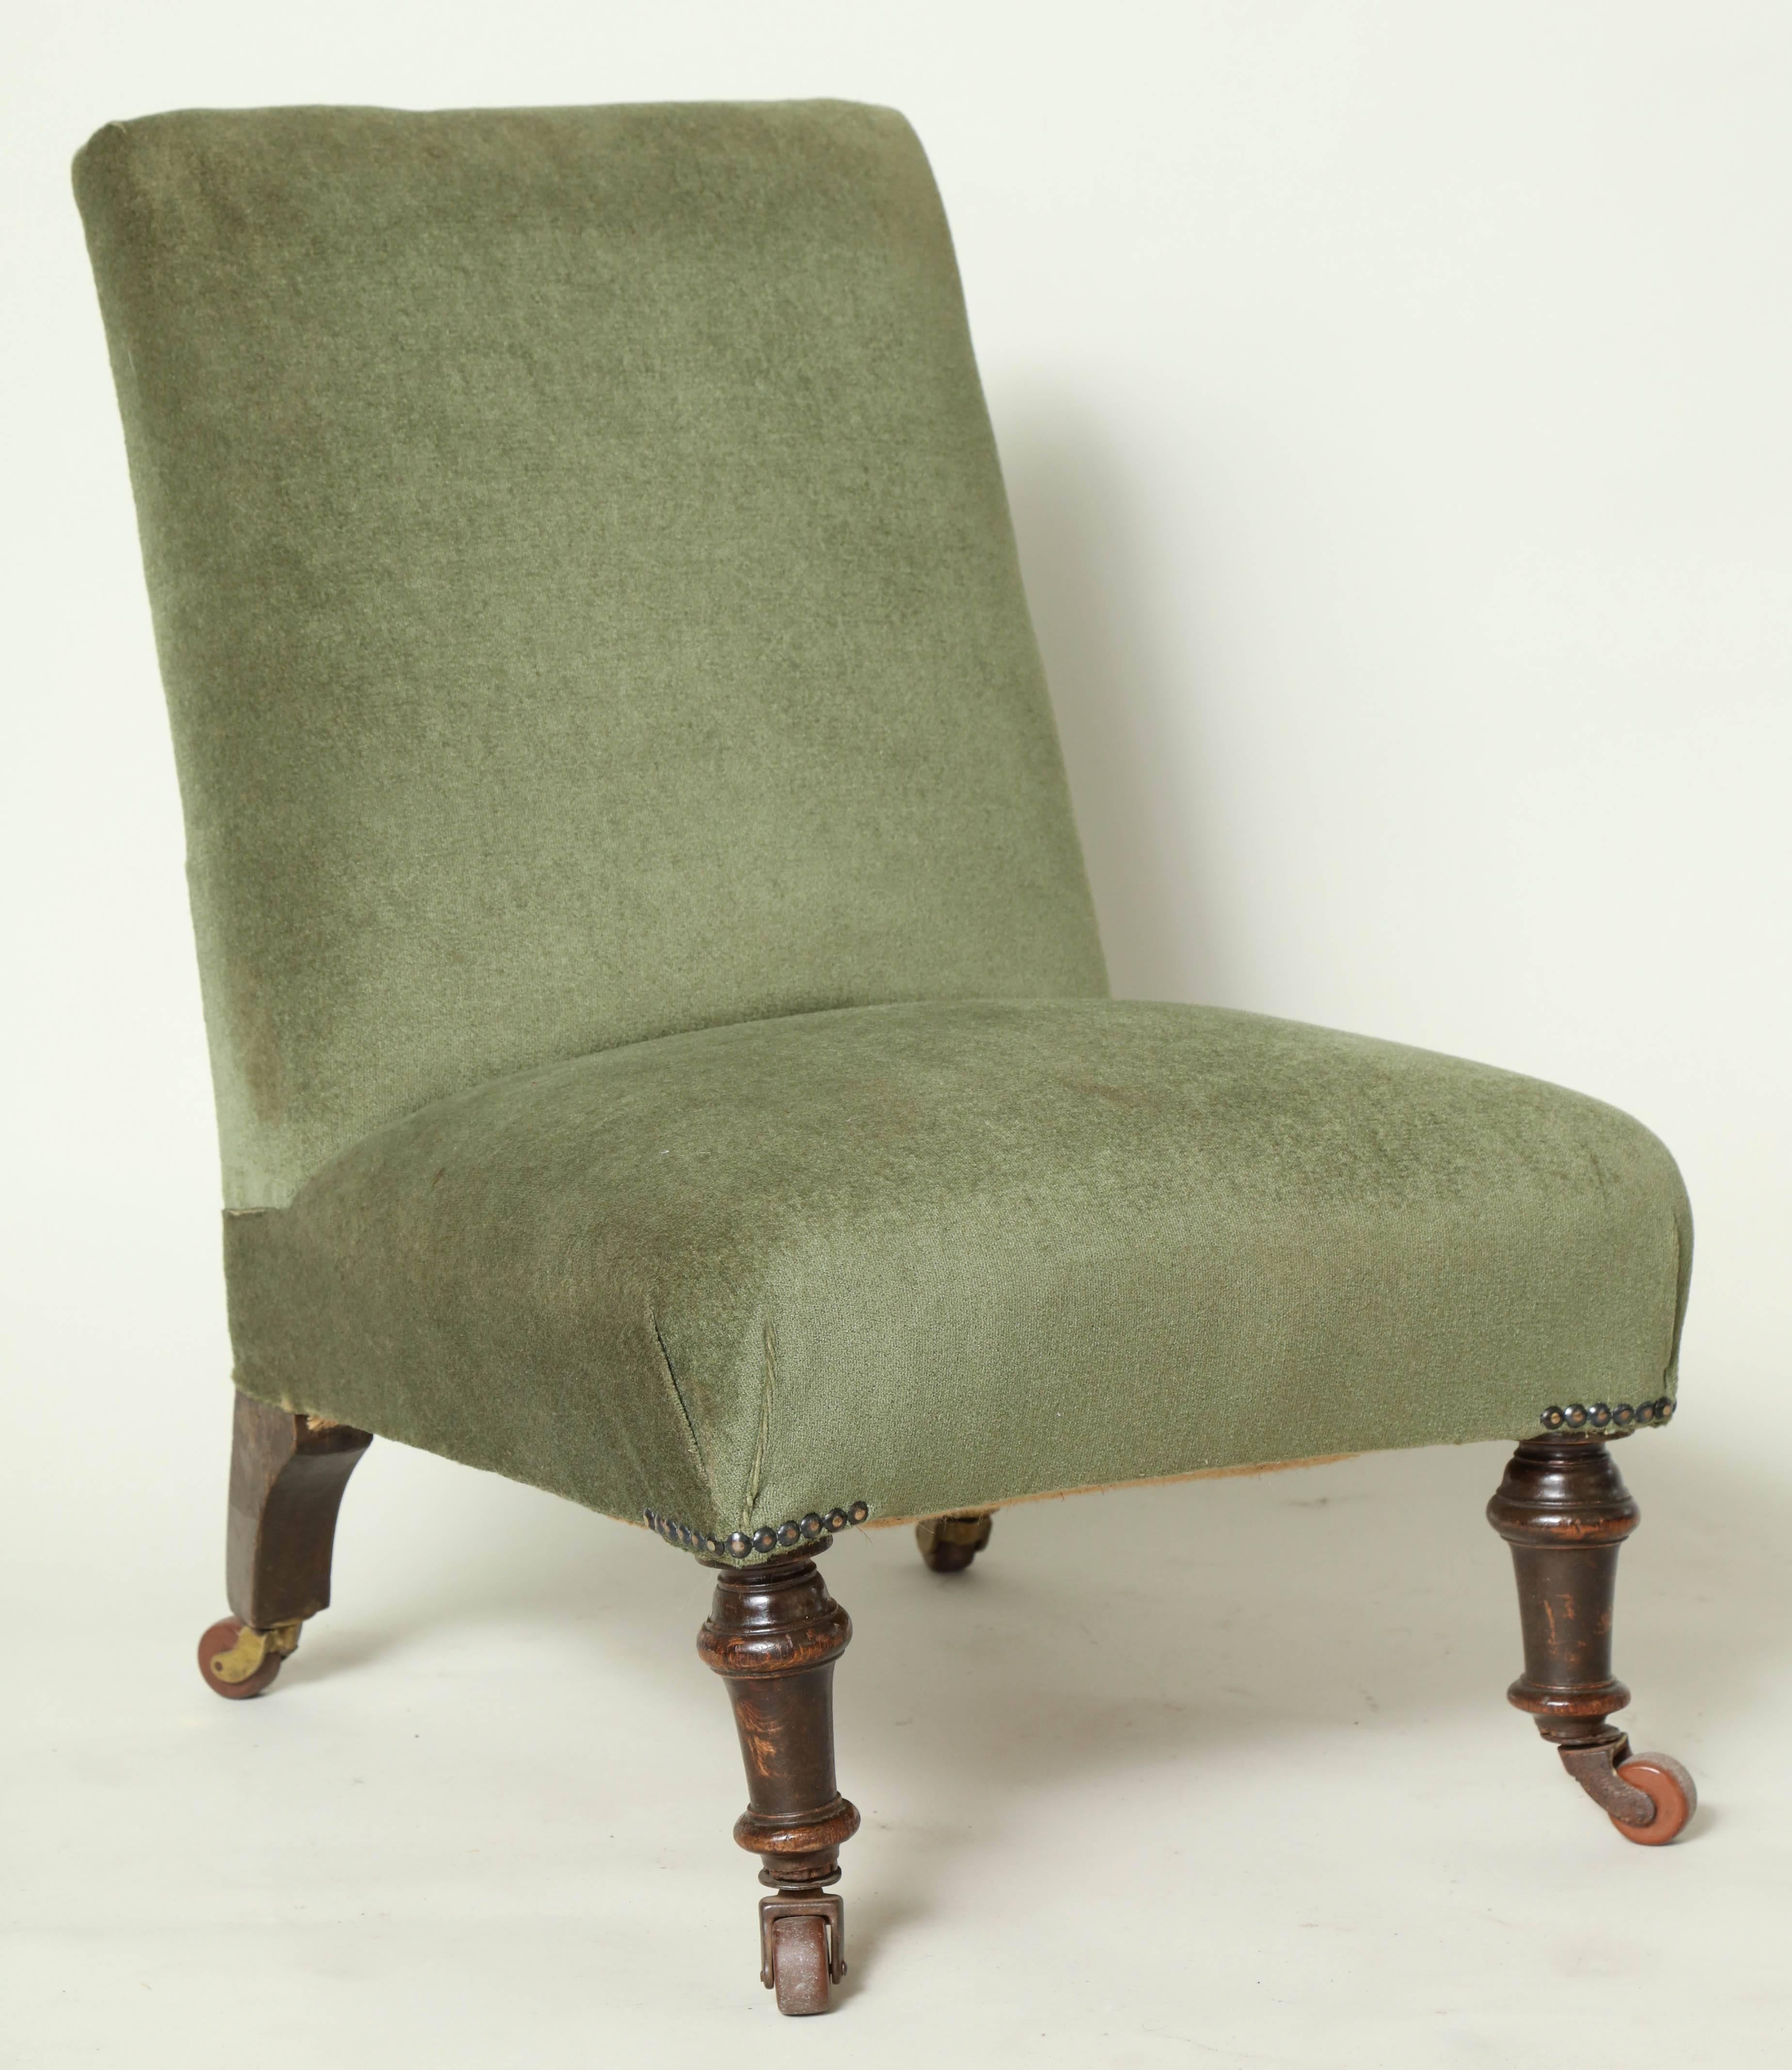 Good late 19th century English upholstered slipper chair, having turned front and shaped back legs, all with original ceramic castors.